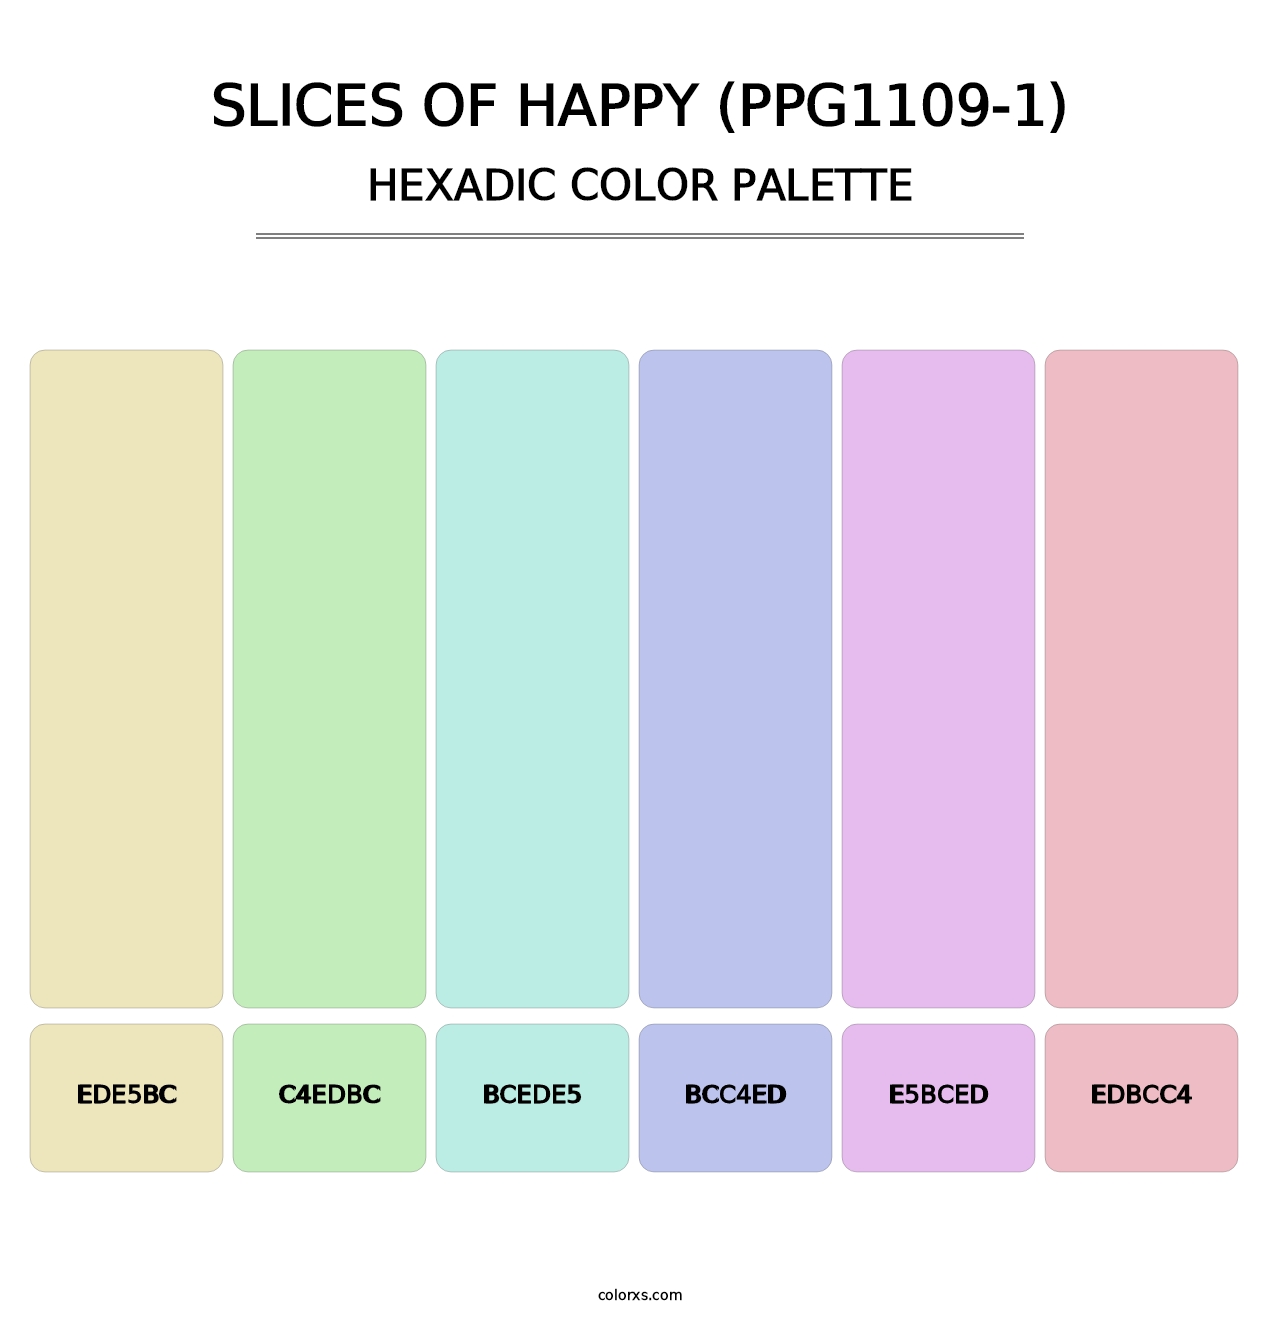 Slices Of Happy (PPG1109-1) - Hexadic Color Palette